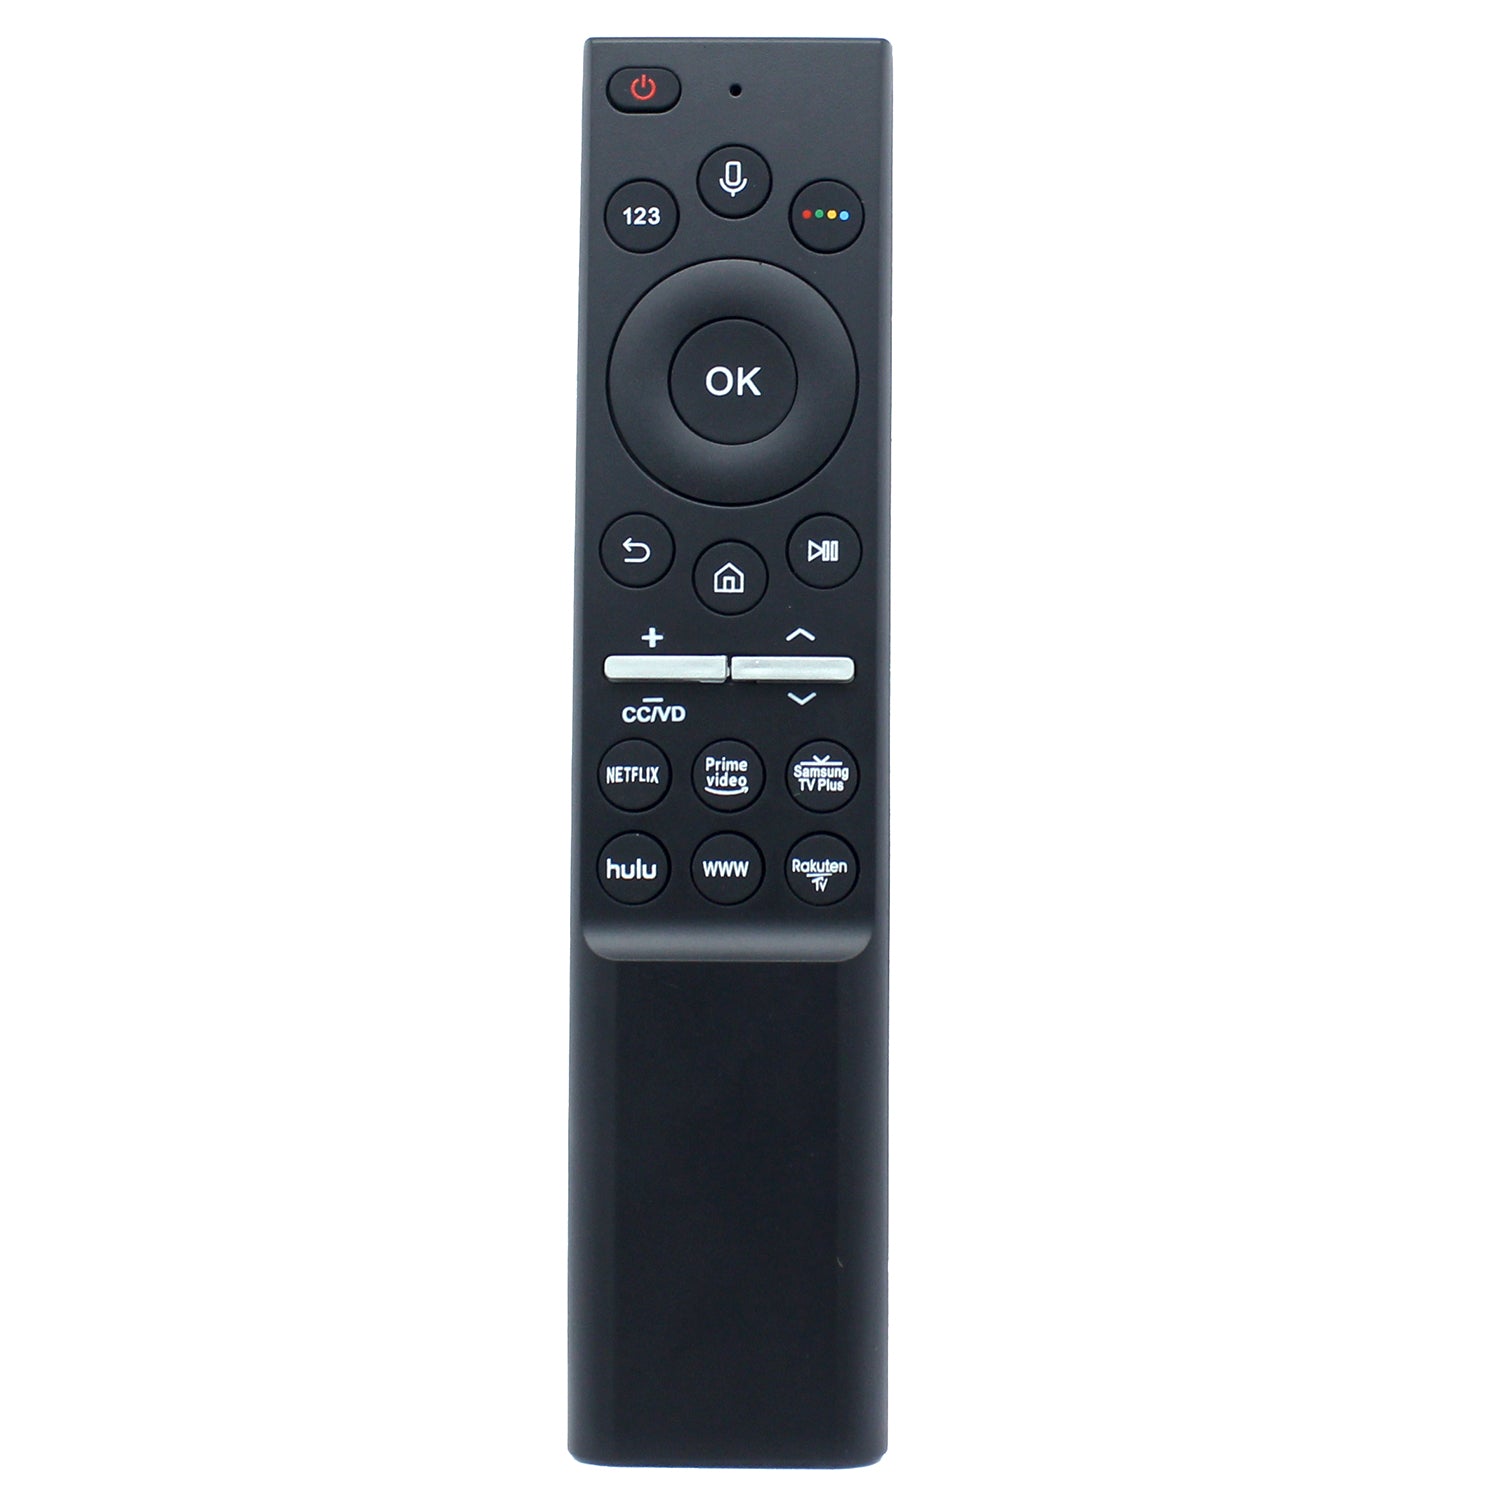 BN59-01275A Voice Remote Replacement for Samsung TV